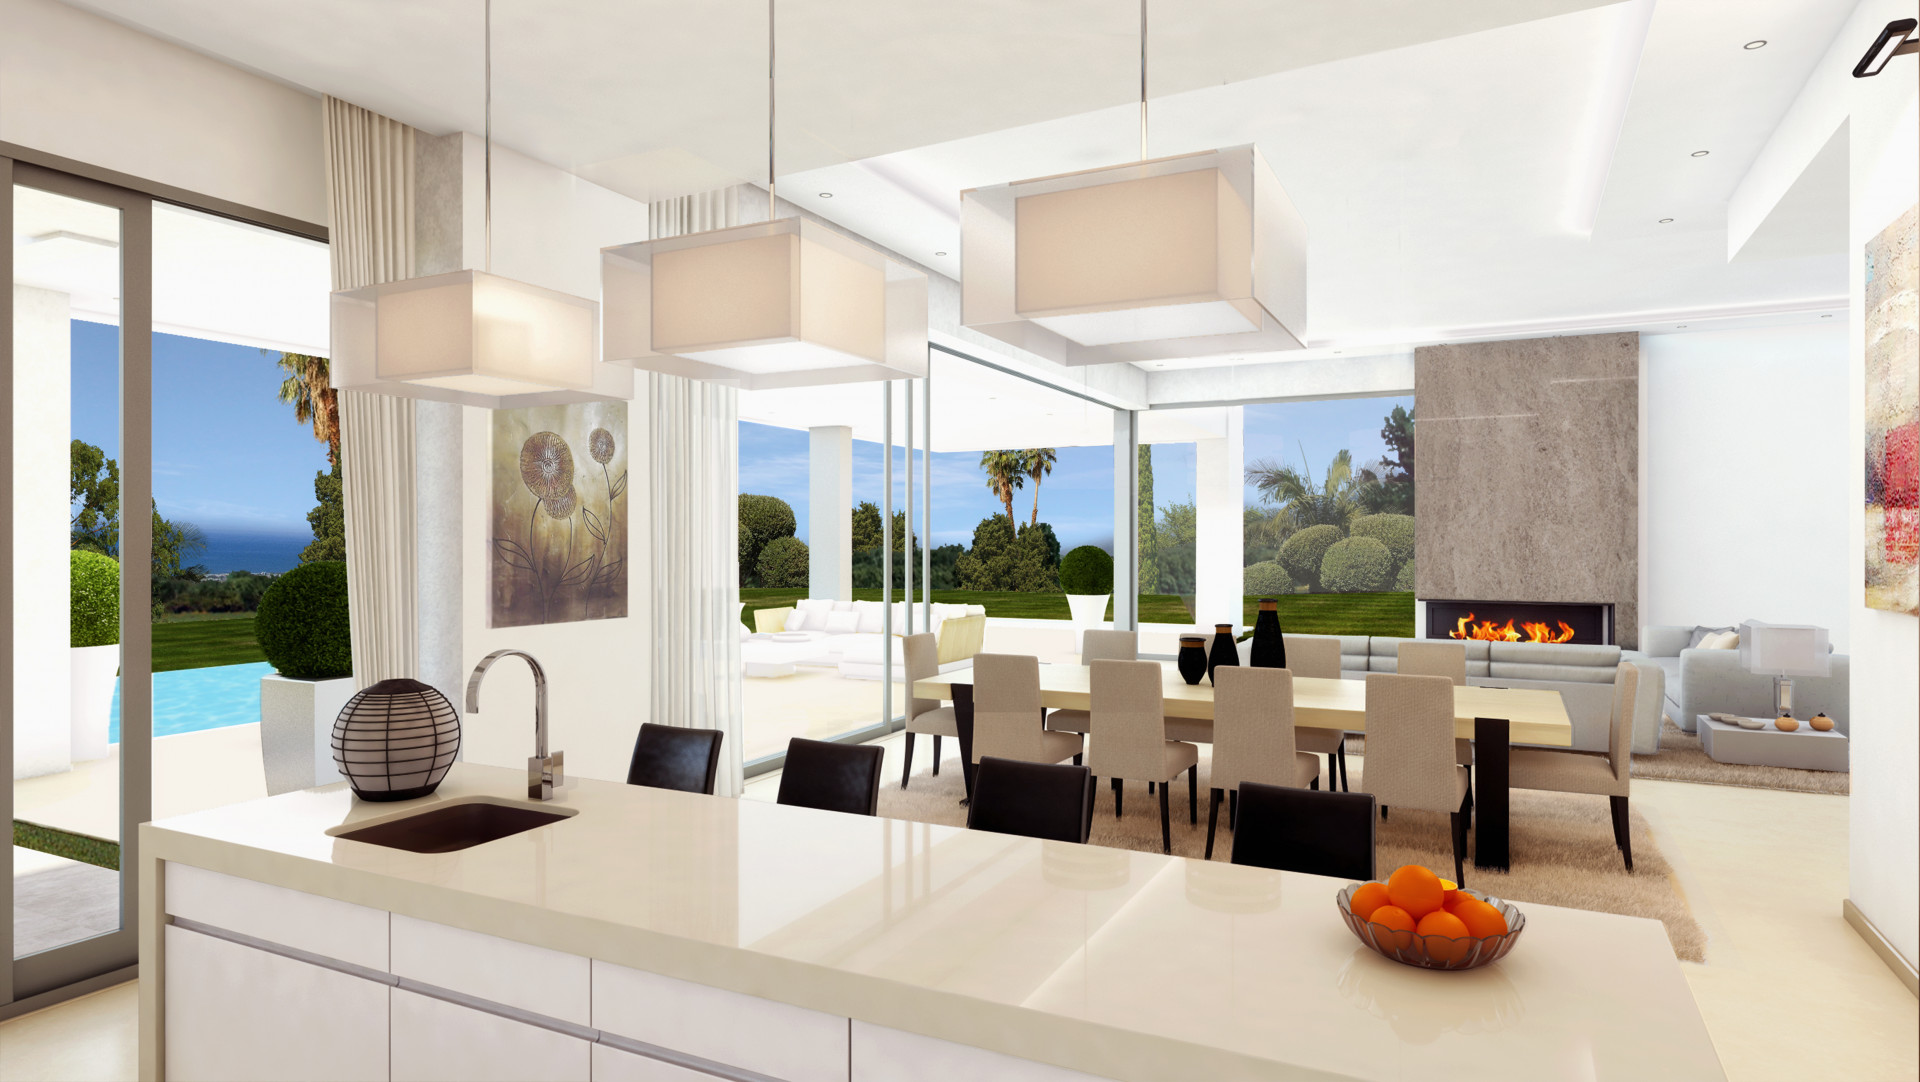 Gated community of luxurious modern villas in The Golden Mile – Marbella